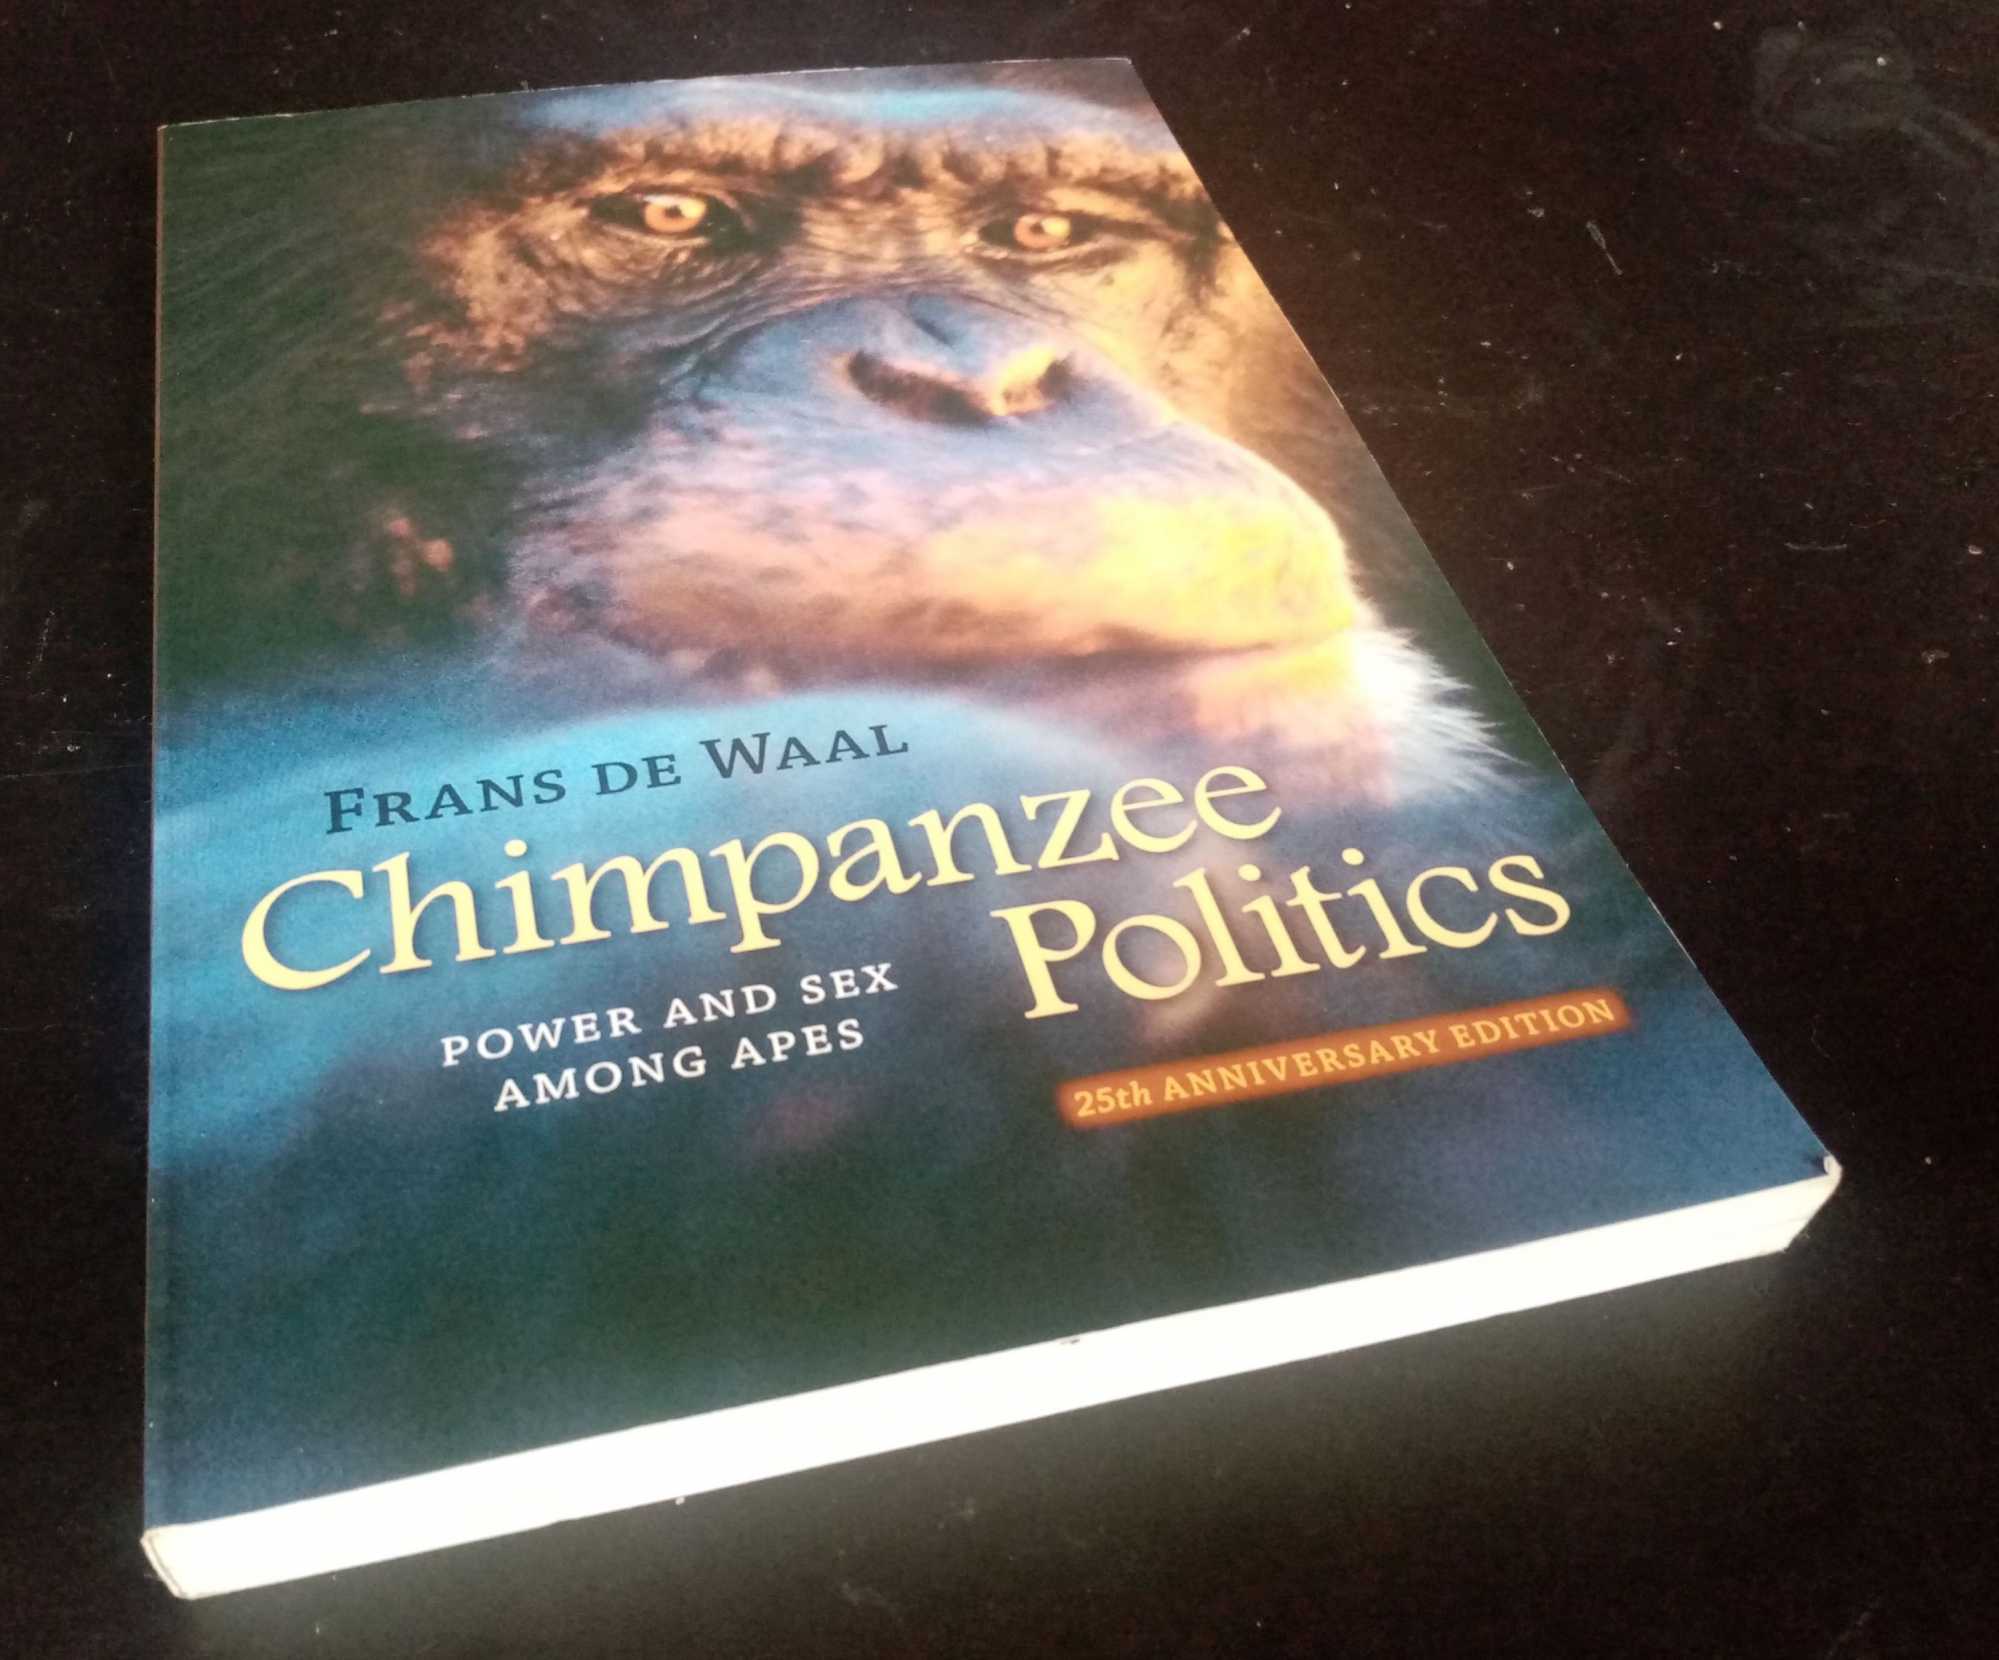 Frans De Waal - Chimpanzee Politics: Power and Sex among Apes.  25th anniversary edition